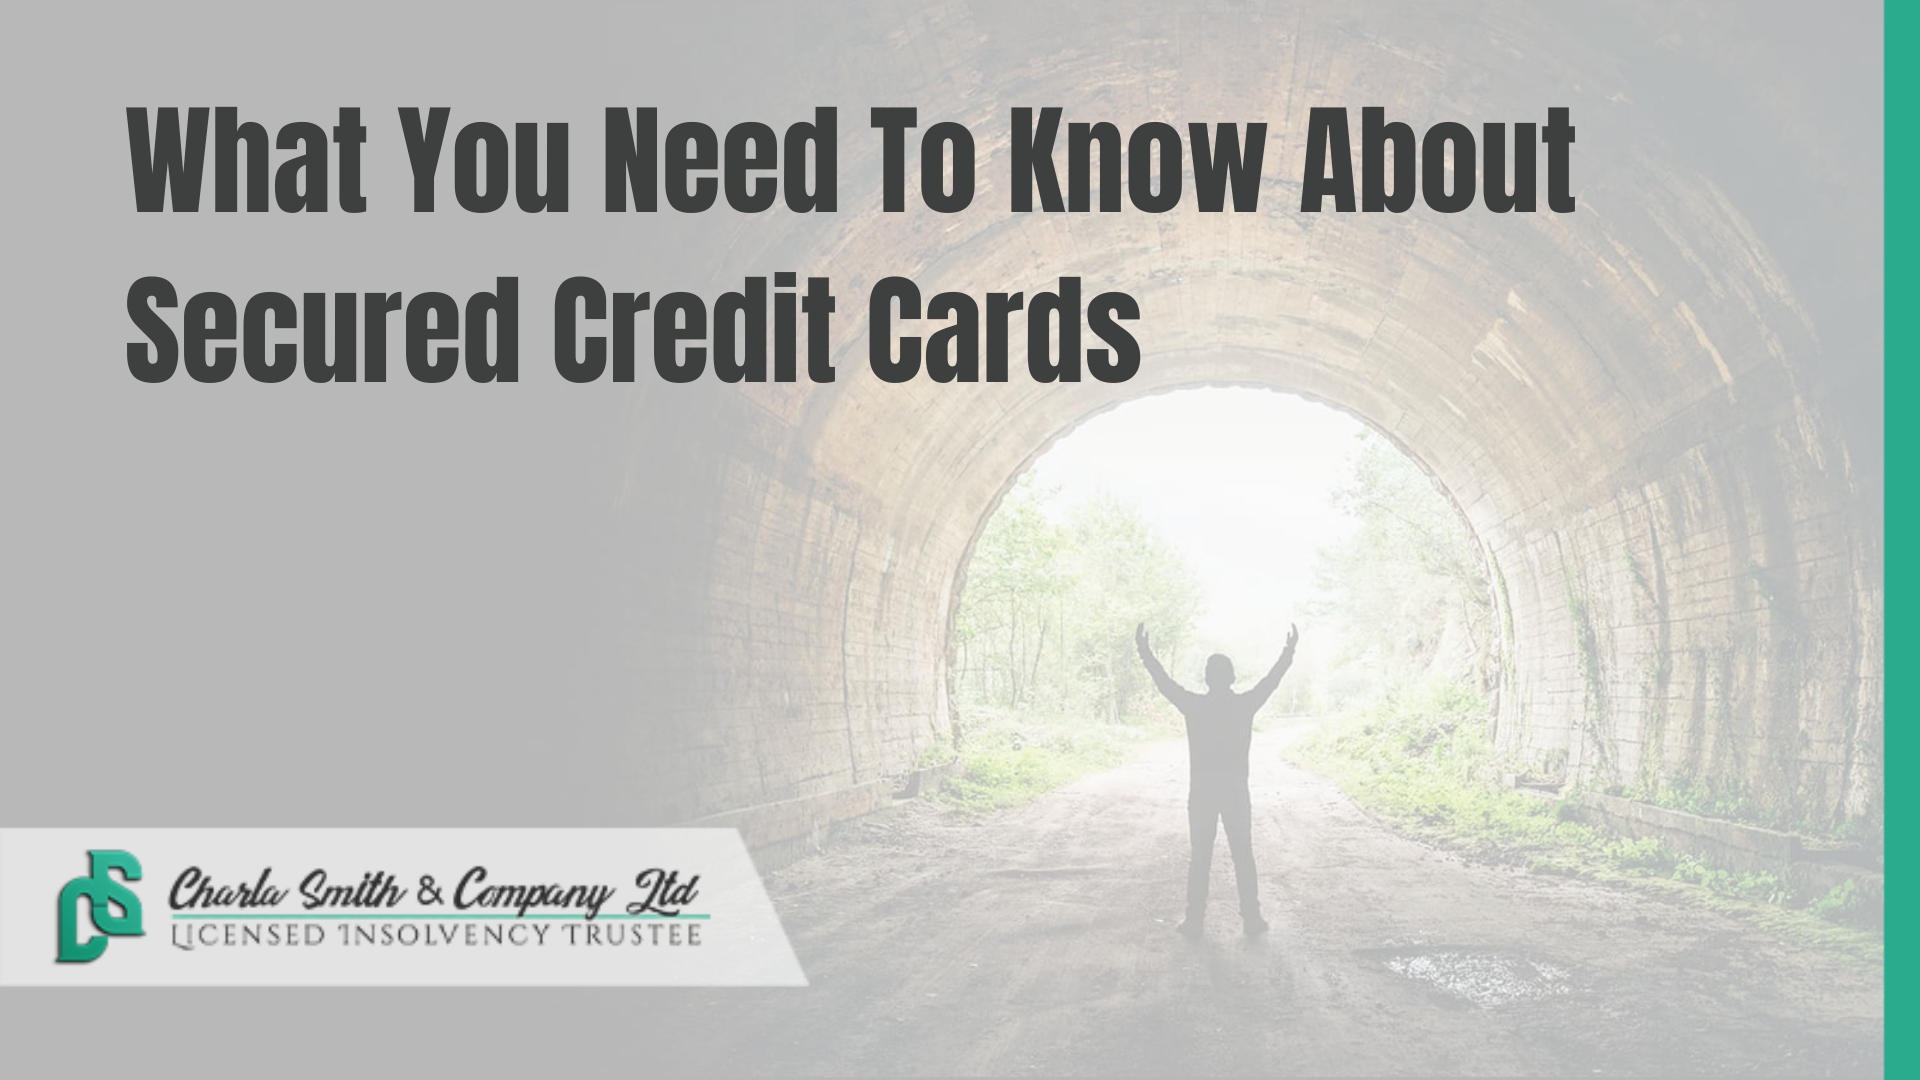 What You Need To Know About Secured Credit Cards